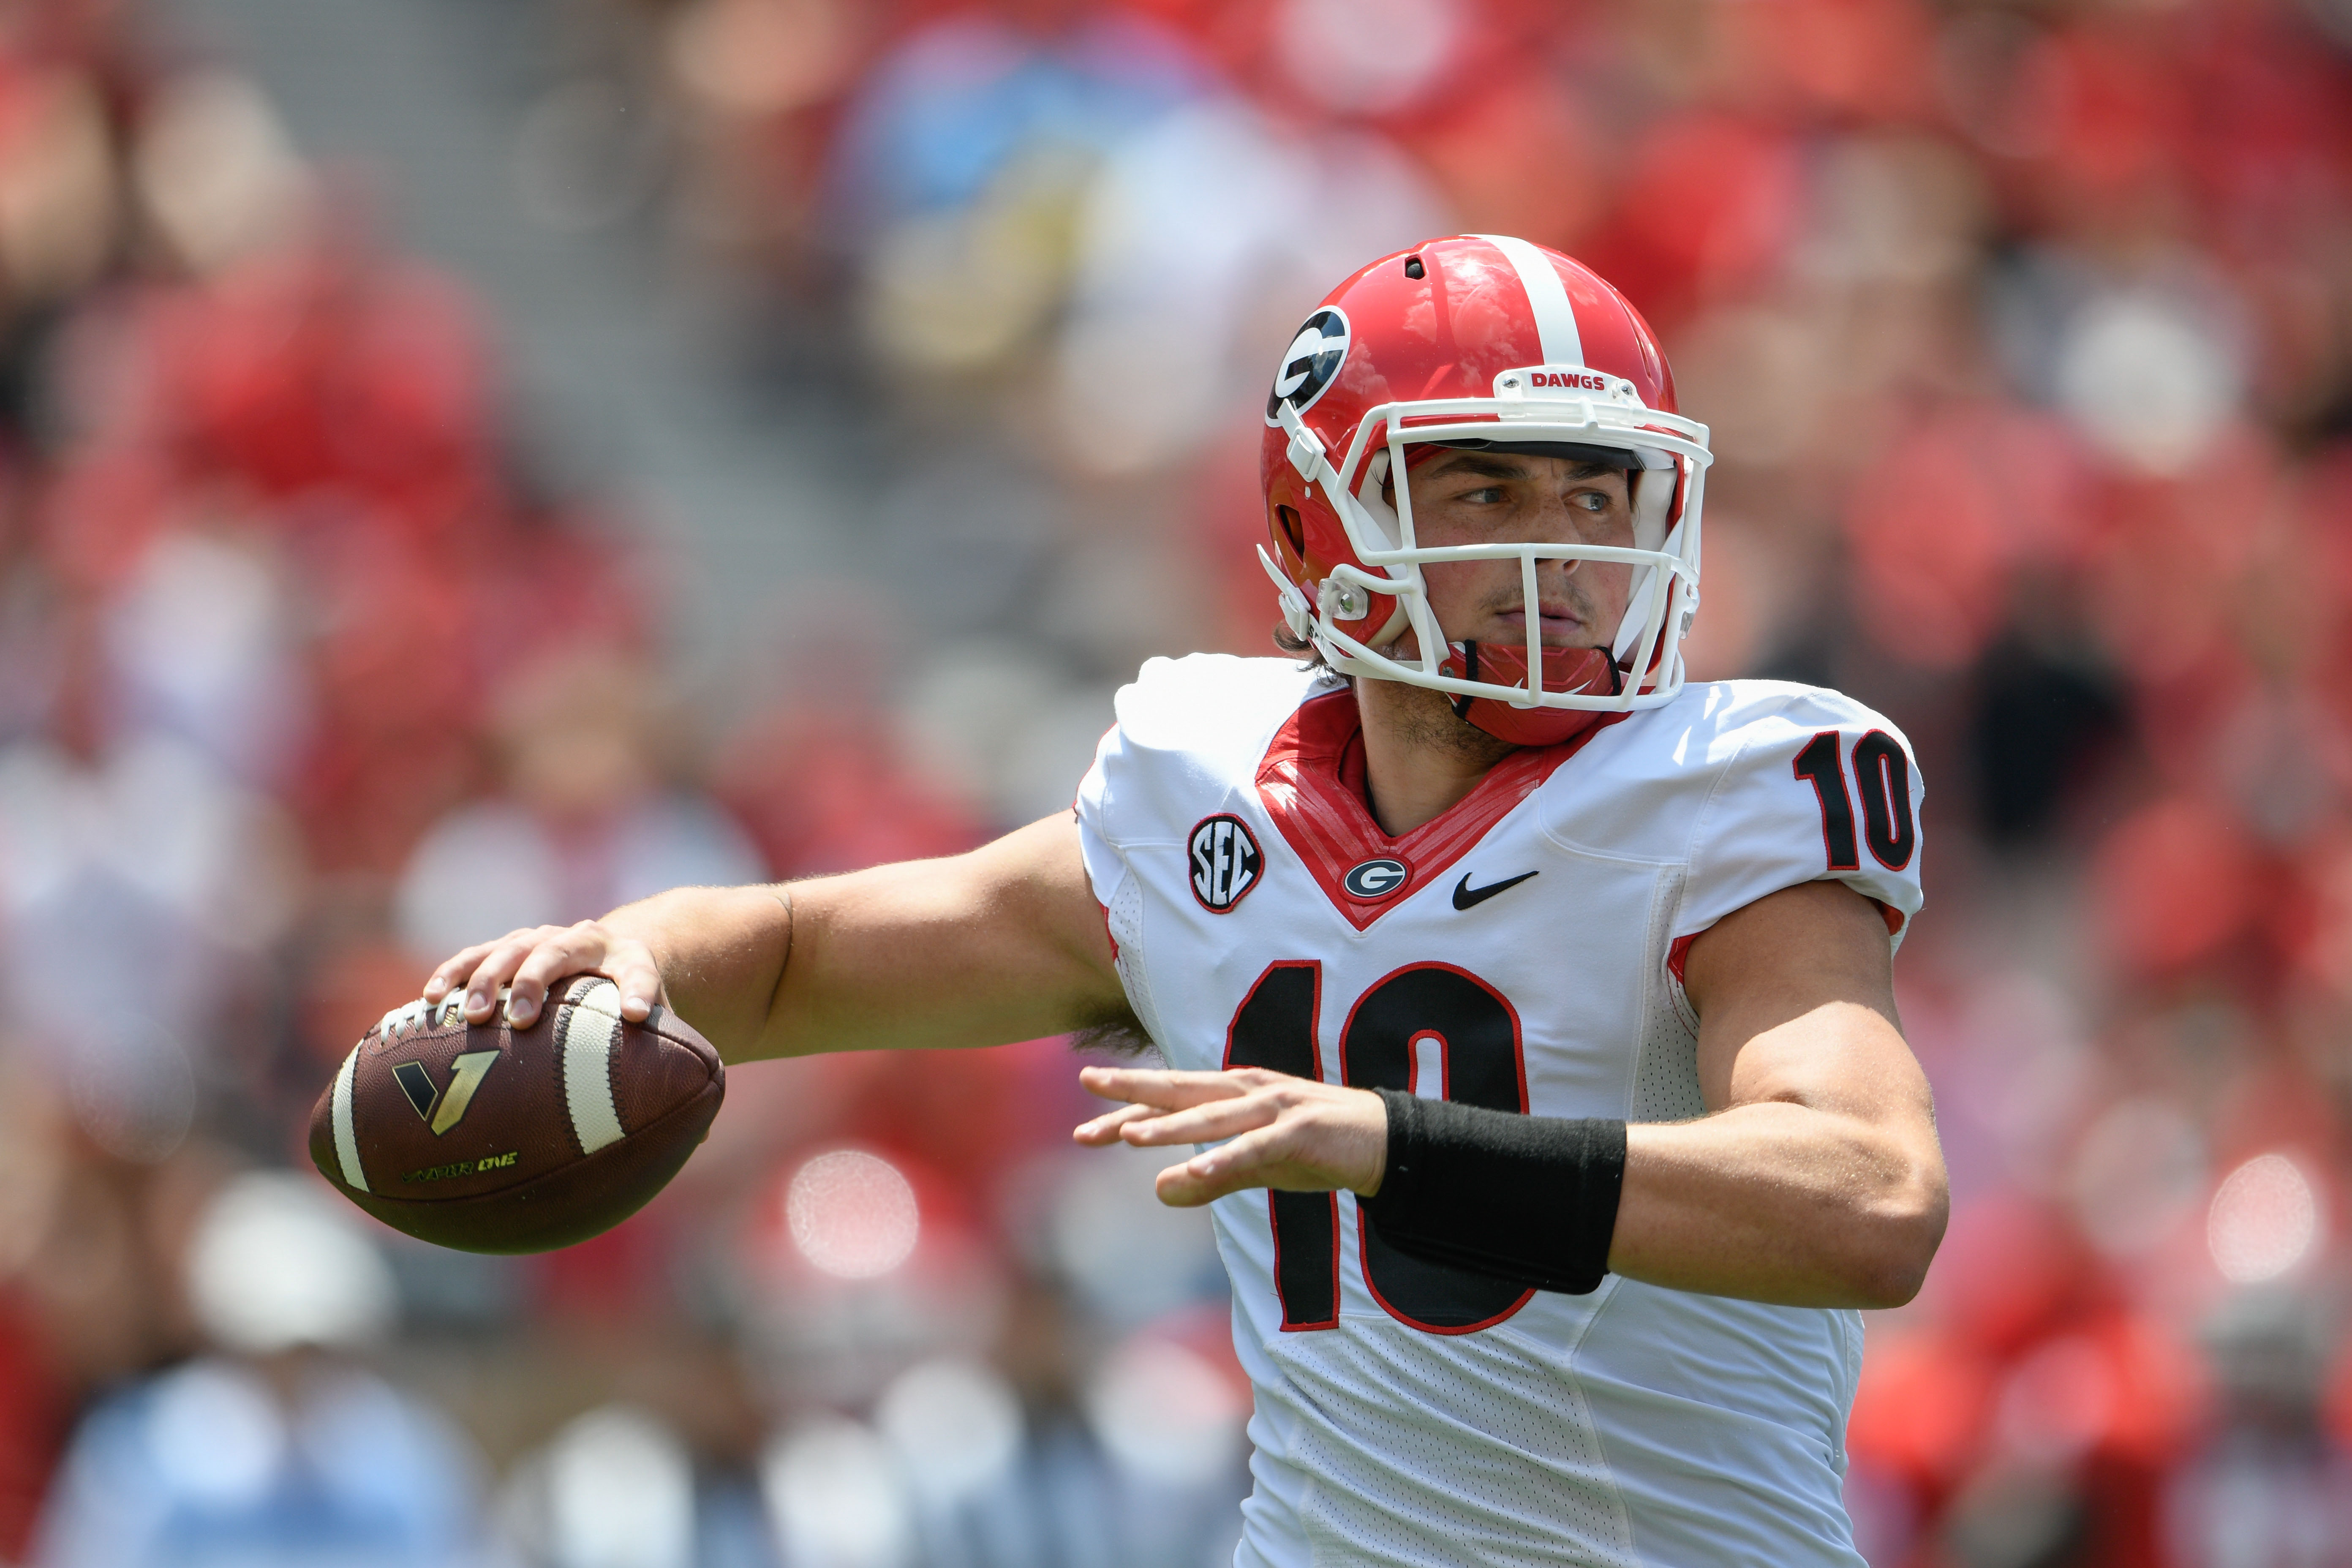 Outlet projects UGA QB Jacob Eason No. 1 pick in 2019 NFL Draft